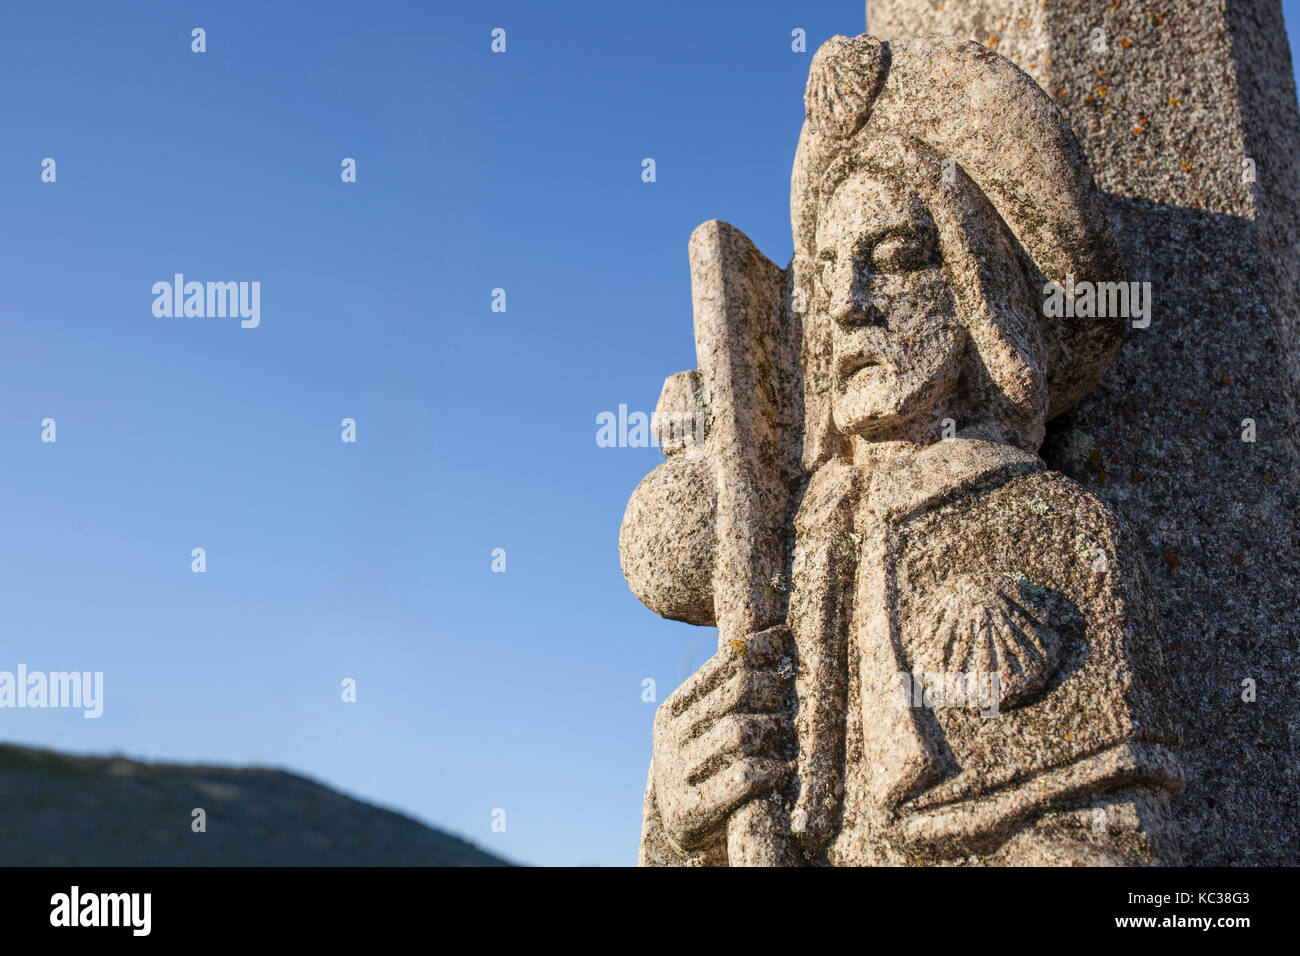 St. James sculpture, a symbol of the route at The Silver Route or Mozarabic Way, Extremadura, Spain Stock Photo